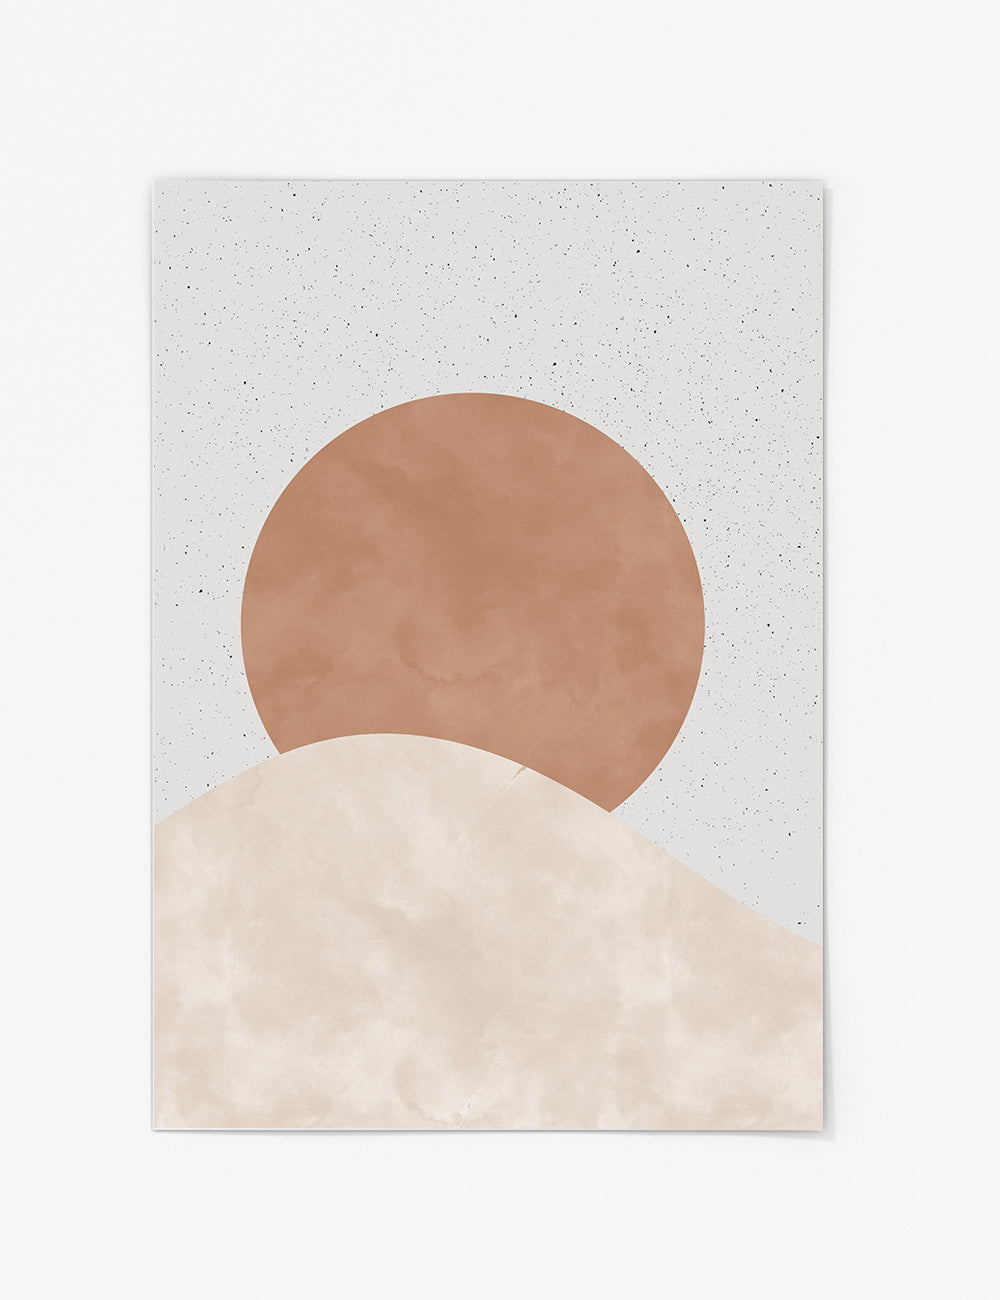 Over the Dune Print